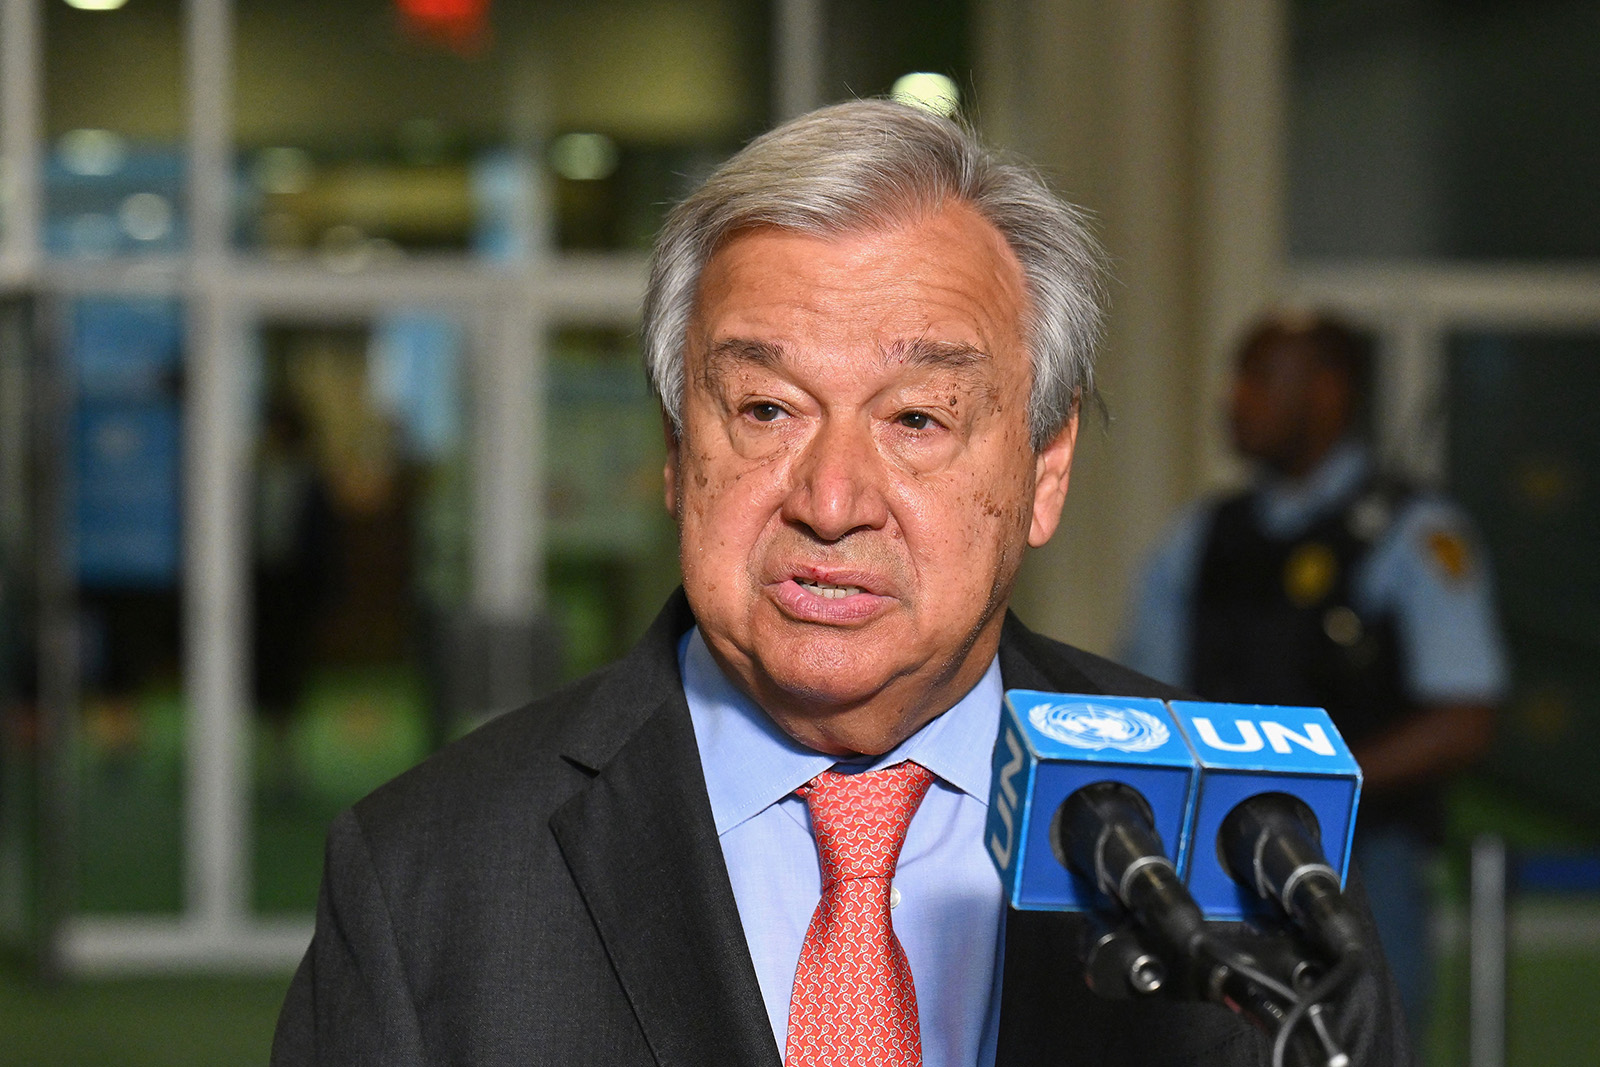 UN Secretary-General António Guterres speaks to the media prior to the 2022 Review Conference of the Parties to the Treaty on the Non-Proliferation of Nuclear Weapons at the United Nations in New York City on August 1.